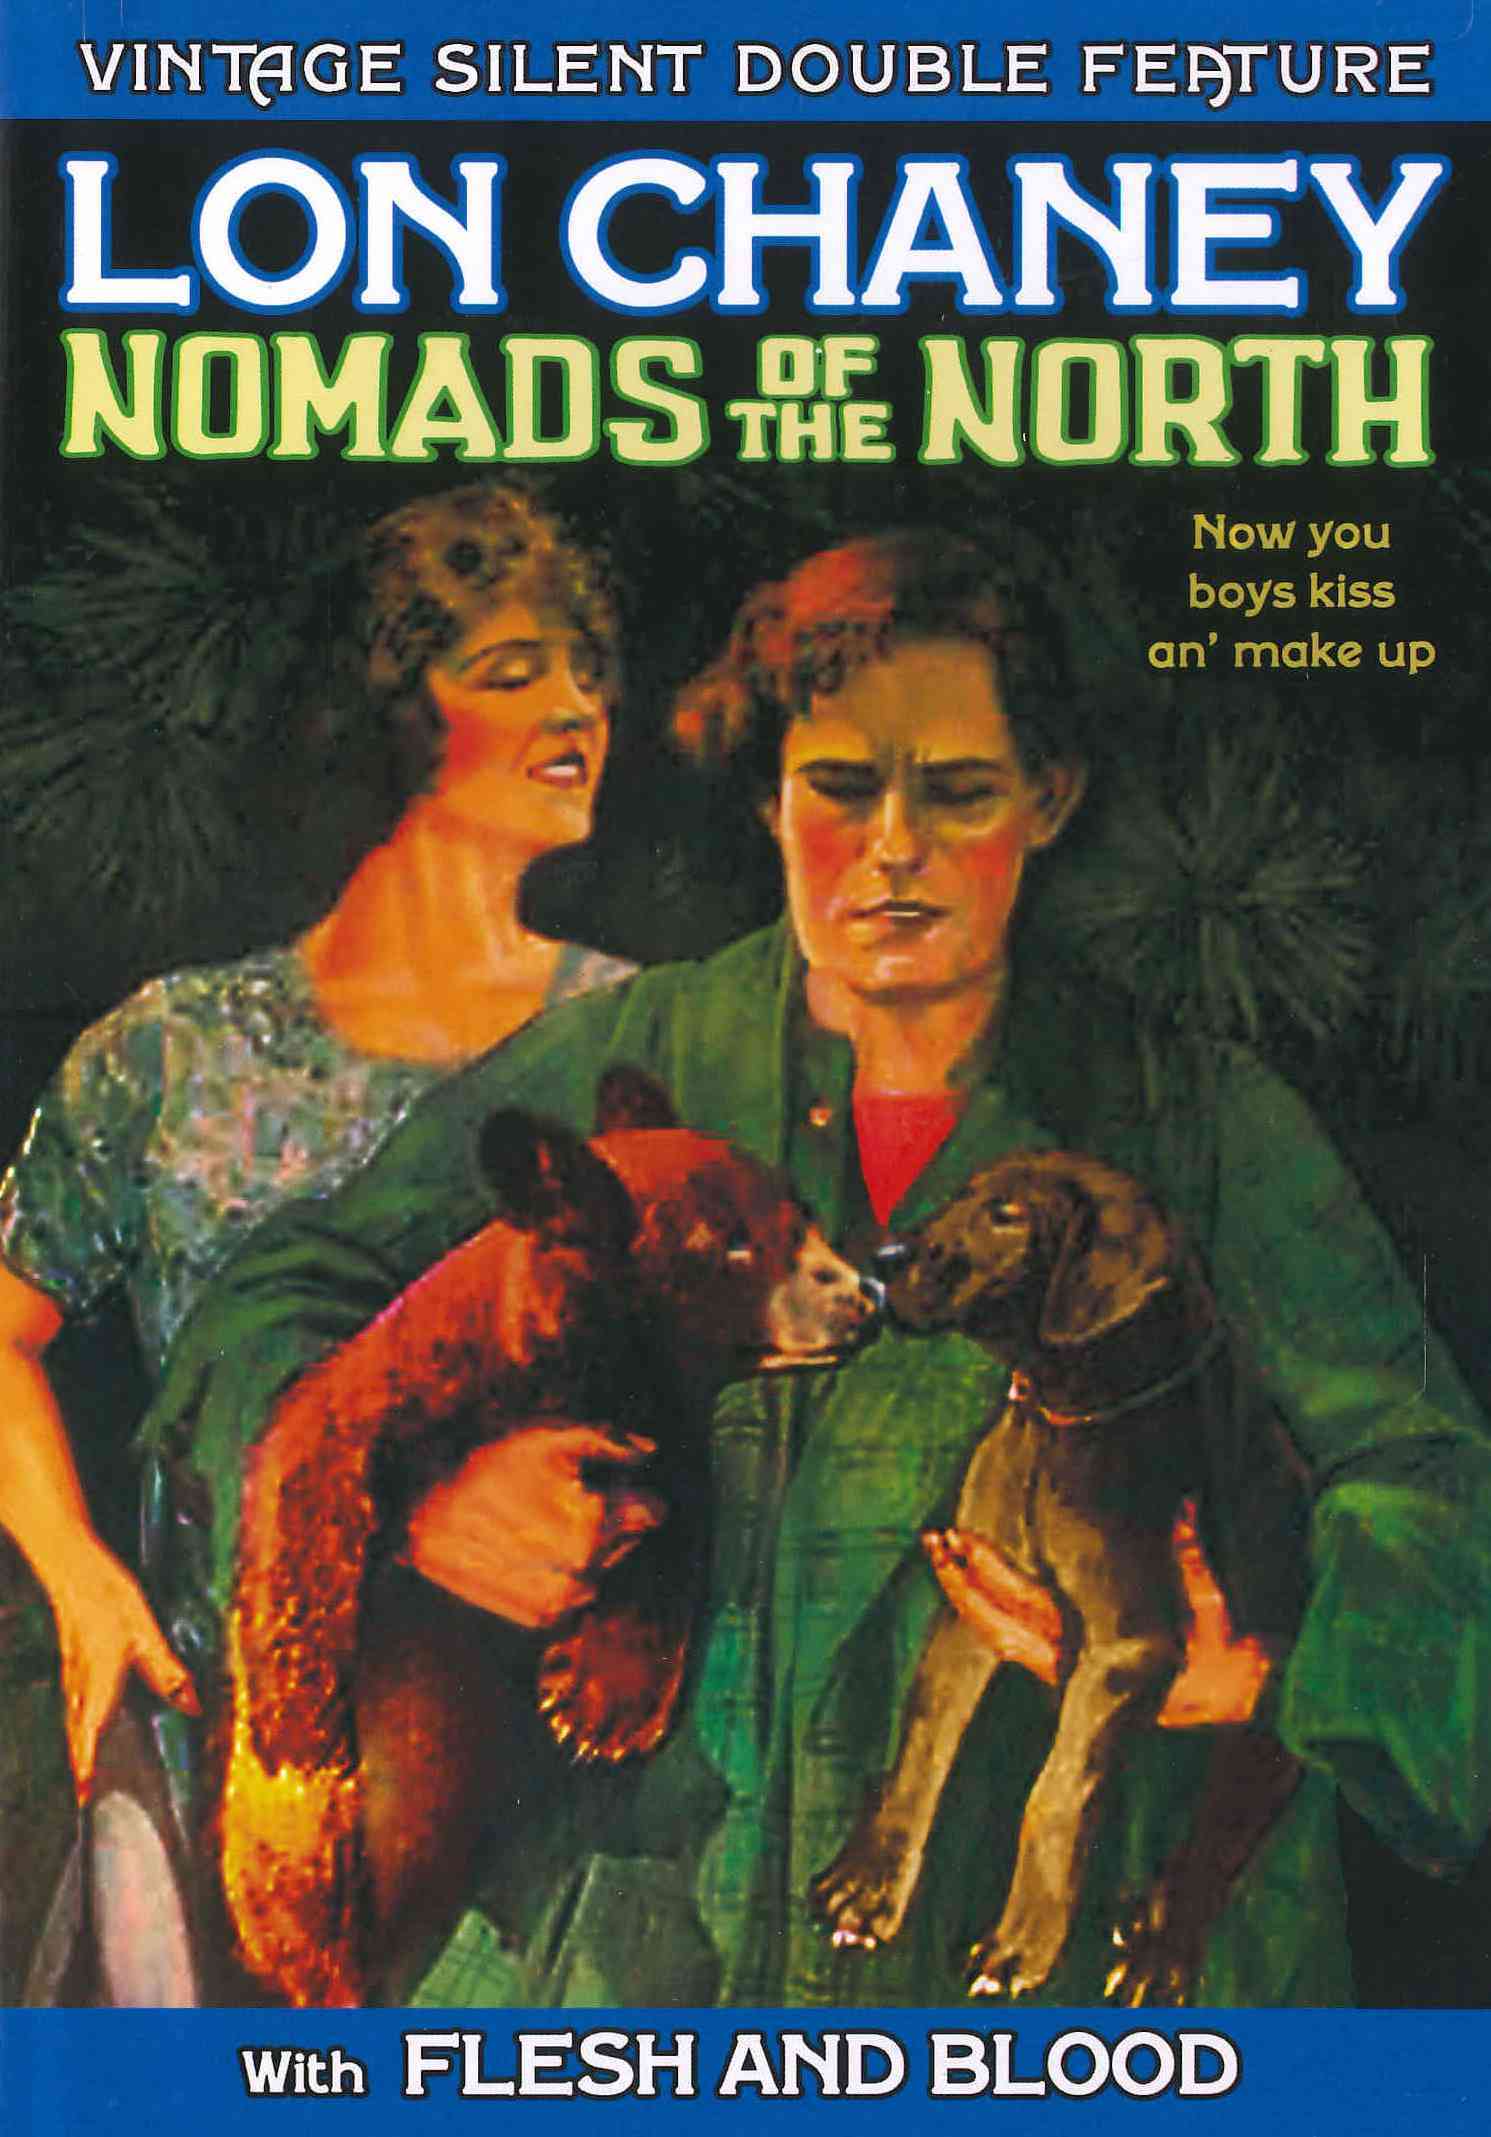 Vintage Silent Double Feature: Nomads of the North/Flesh and Blood cover art